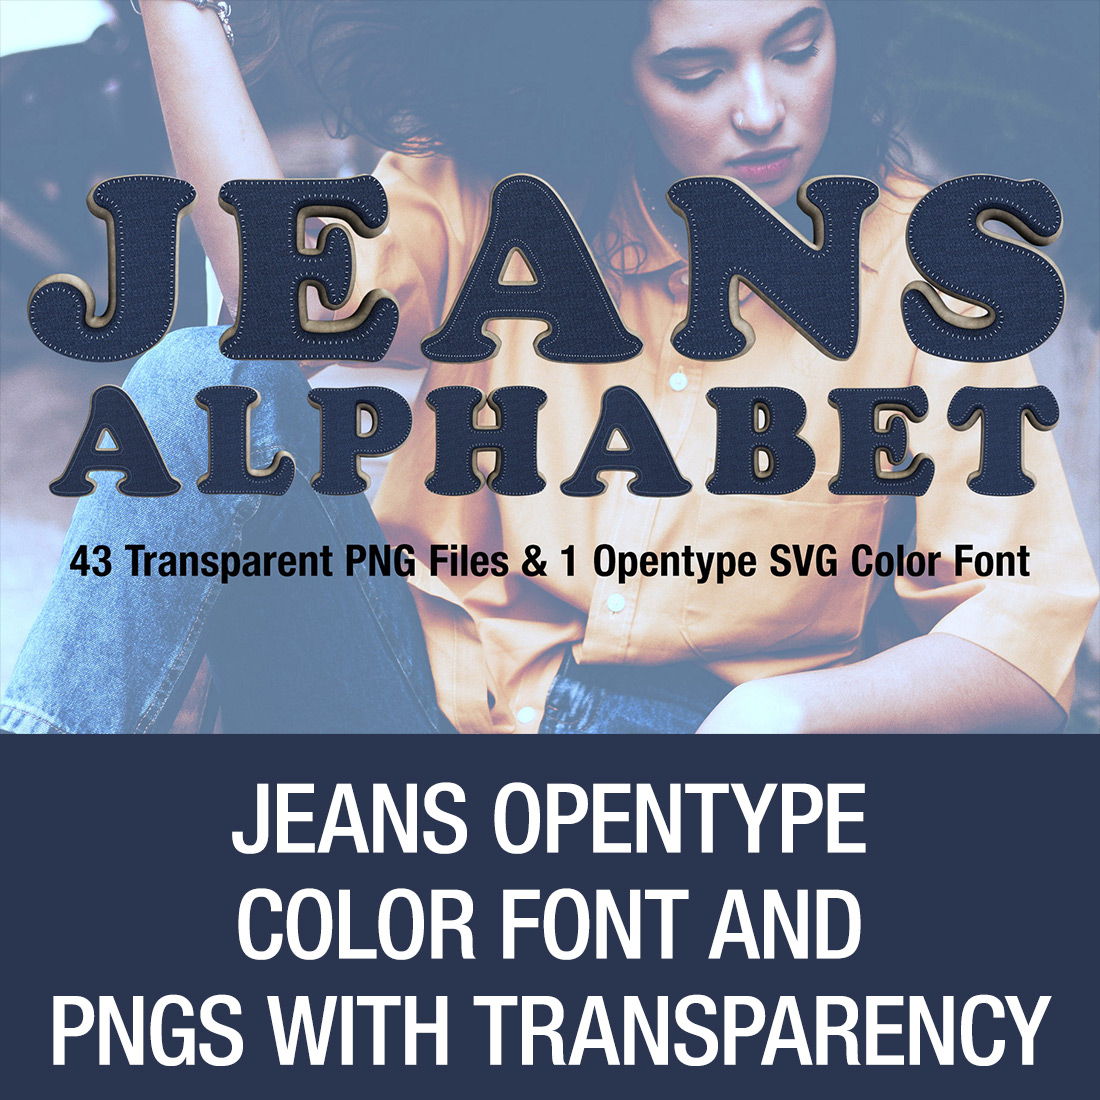 Ms Jeans Opentype SVG Font and PNGs - main image preview.